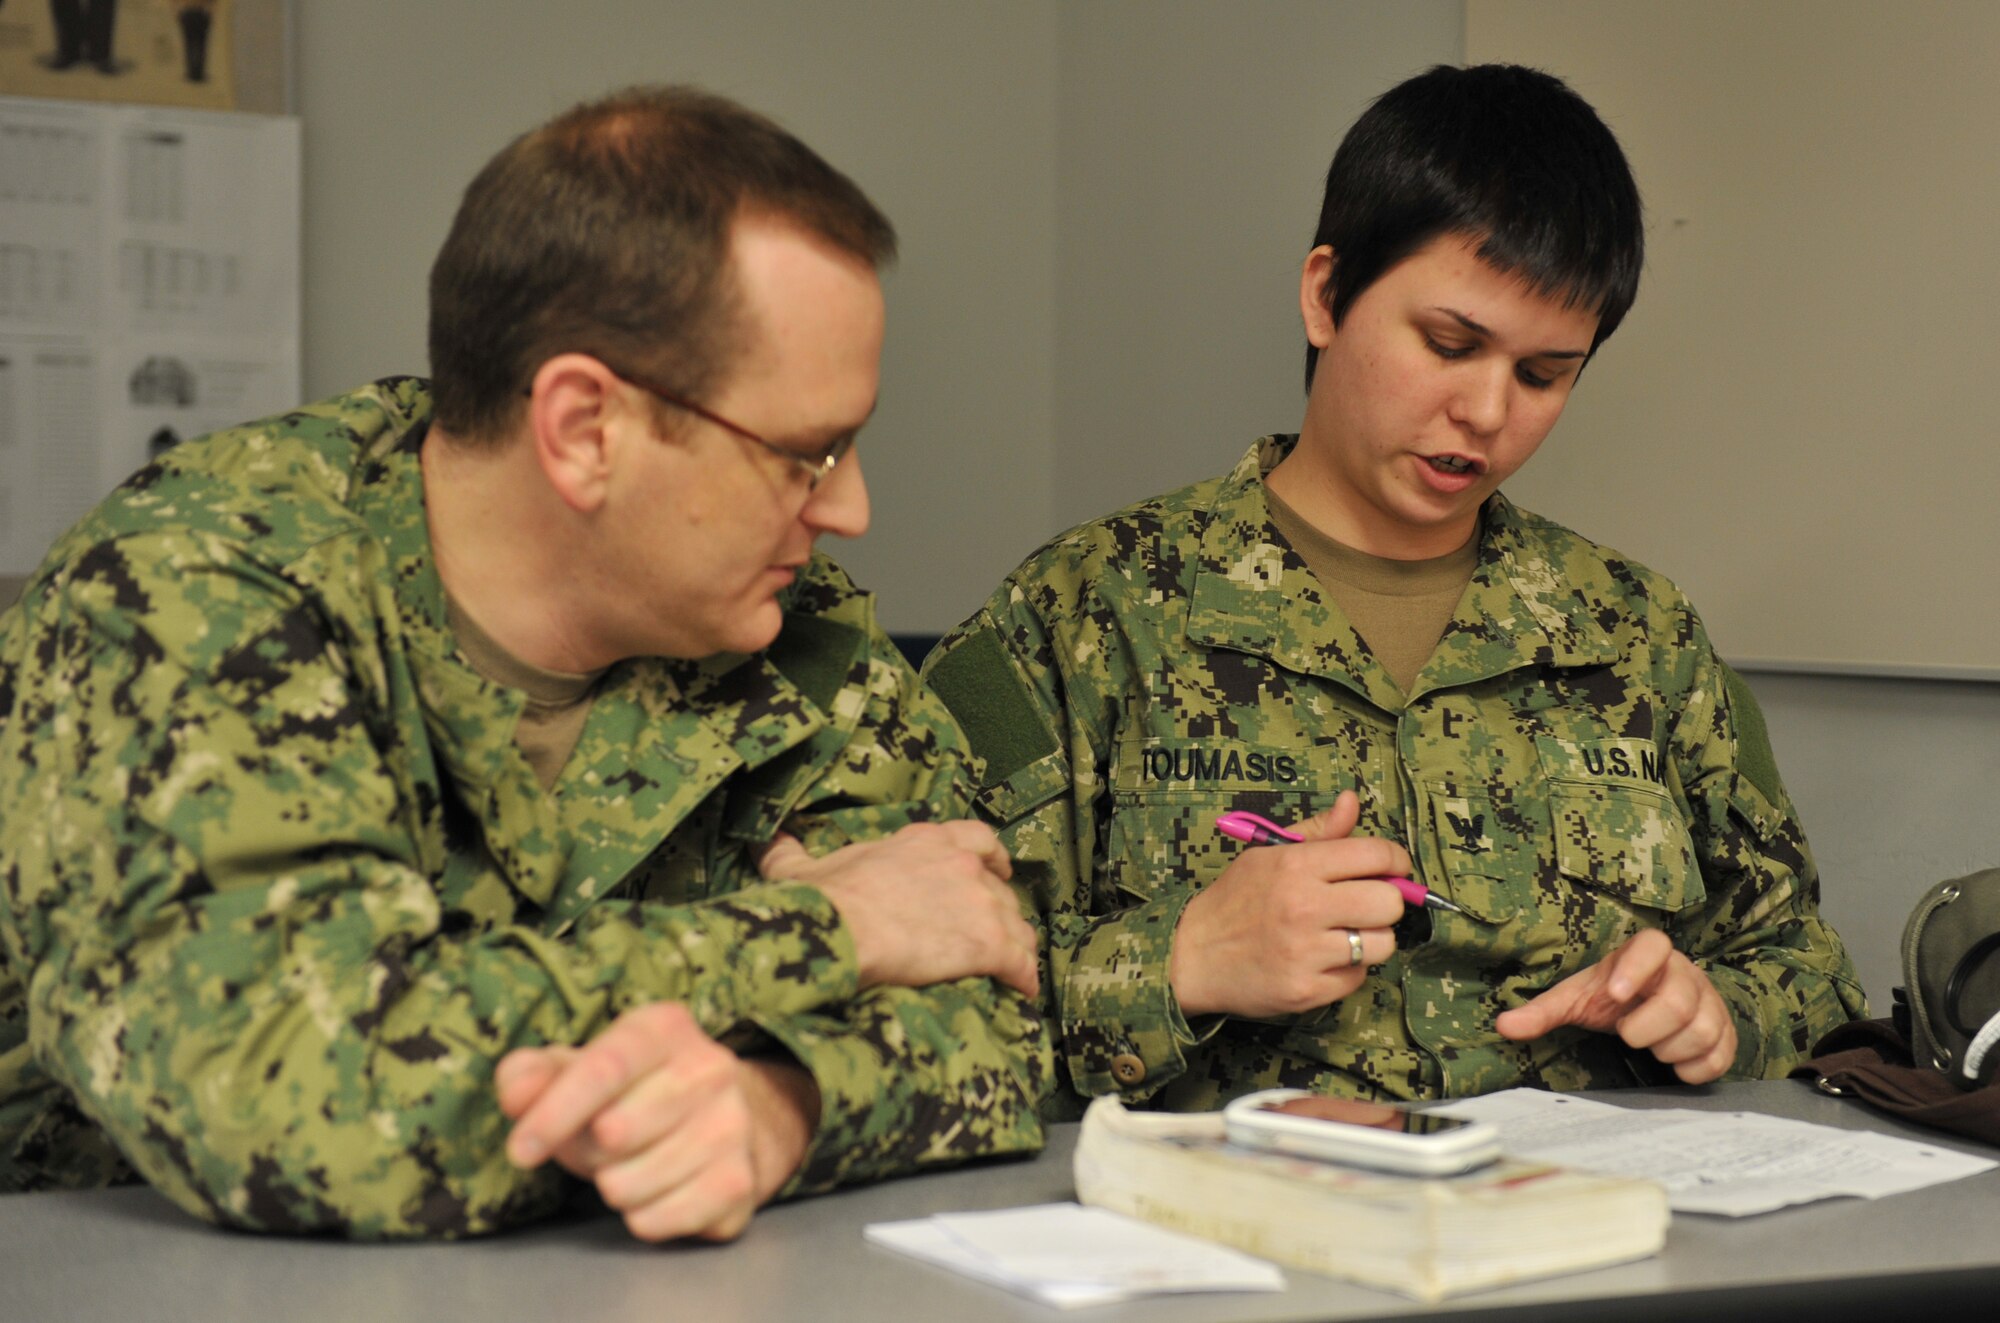 WHITEMAN AIR FORCE BASE, Mo. -- Petty Officer 2nd Class Jason Bartlett, and Petty Officer 3rd Class Tonja Toumasis, Coastal Riverine Squadron 11, Detachment Alpha 2 electric technician, study U.S. Navy history for an upcoming exam during their drill weekend, Feb. 9, 2013. Each reservist must maintain a security clearance, have a passport, be medically fit to fight, have a family care plan ready and be swim-qualified. (U.S. Air Force photo/Heidi Hunt) (Released)